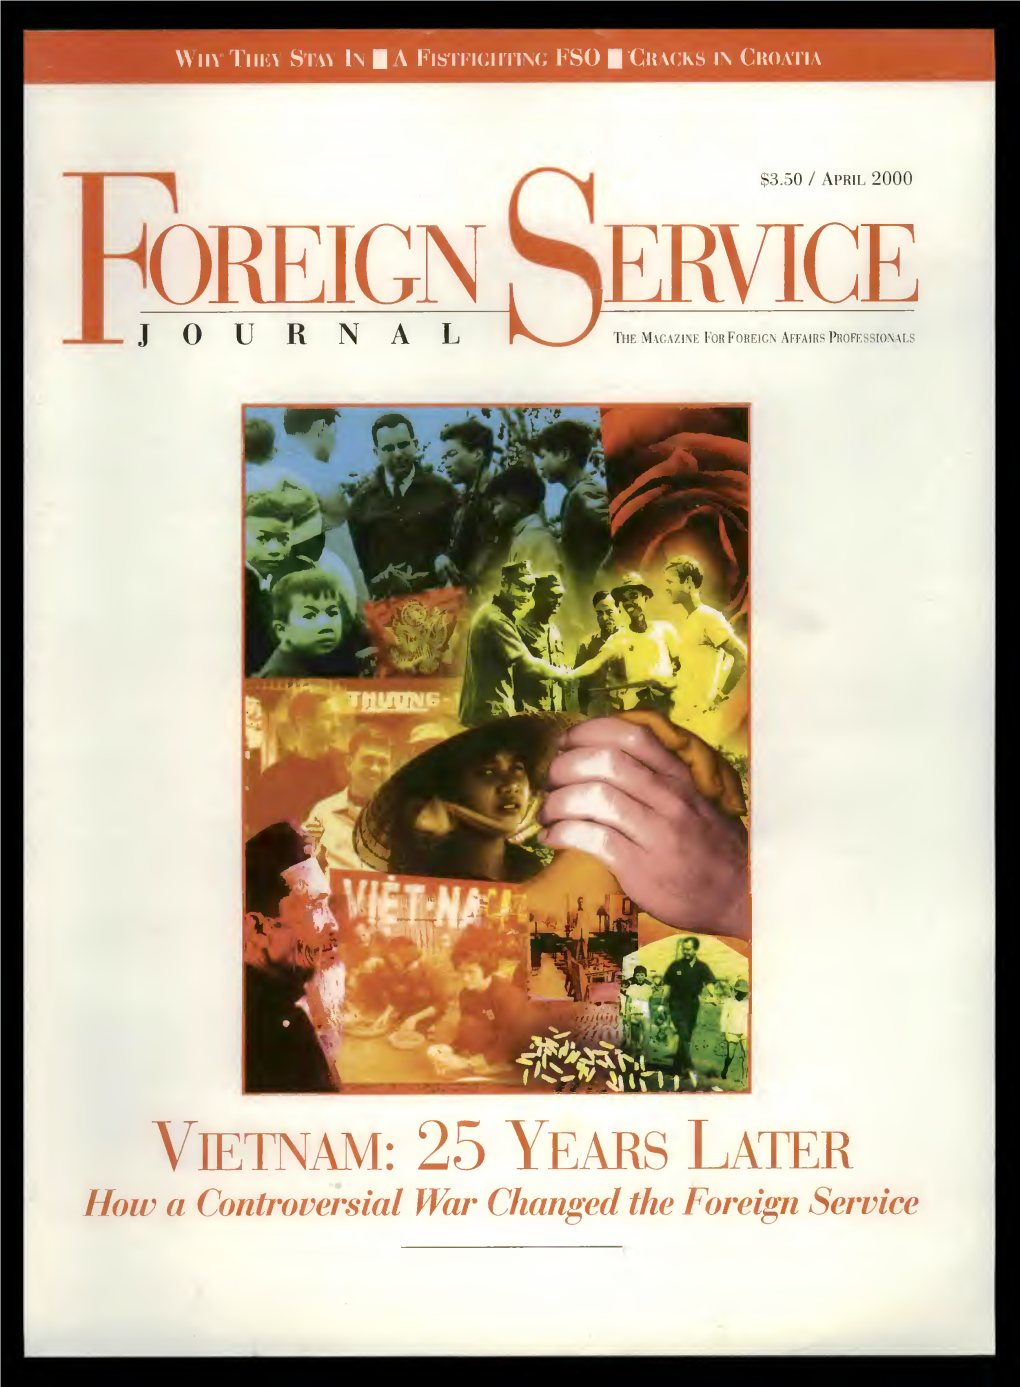 The Foreign Service Journal, April 2000